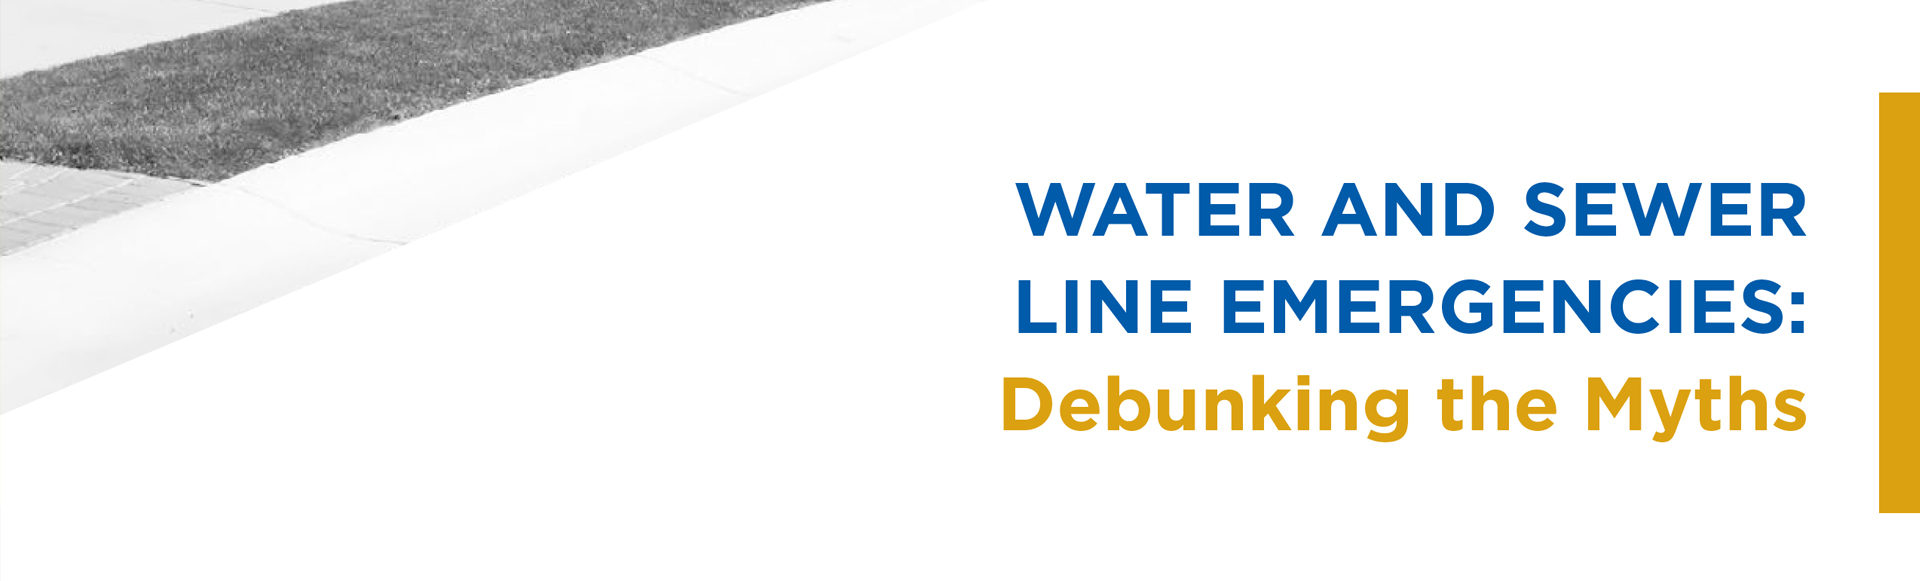 Water Water and Sewer Line Emergencies: Debunking the Myths